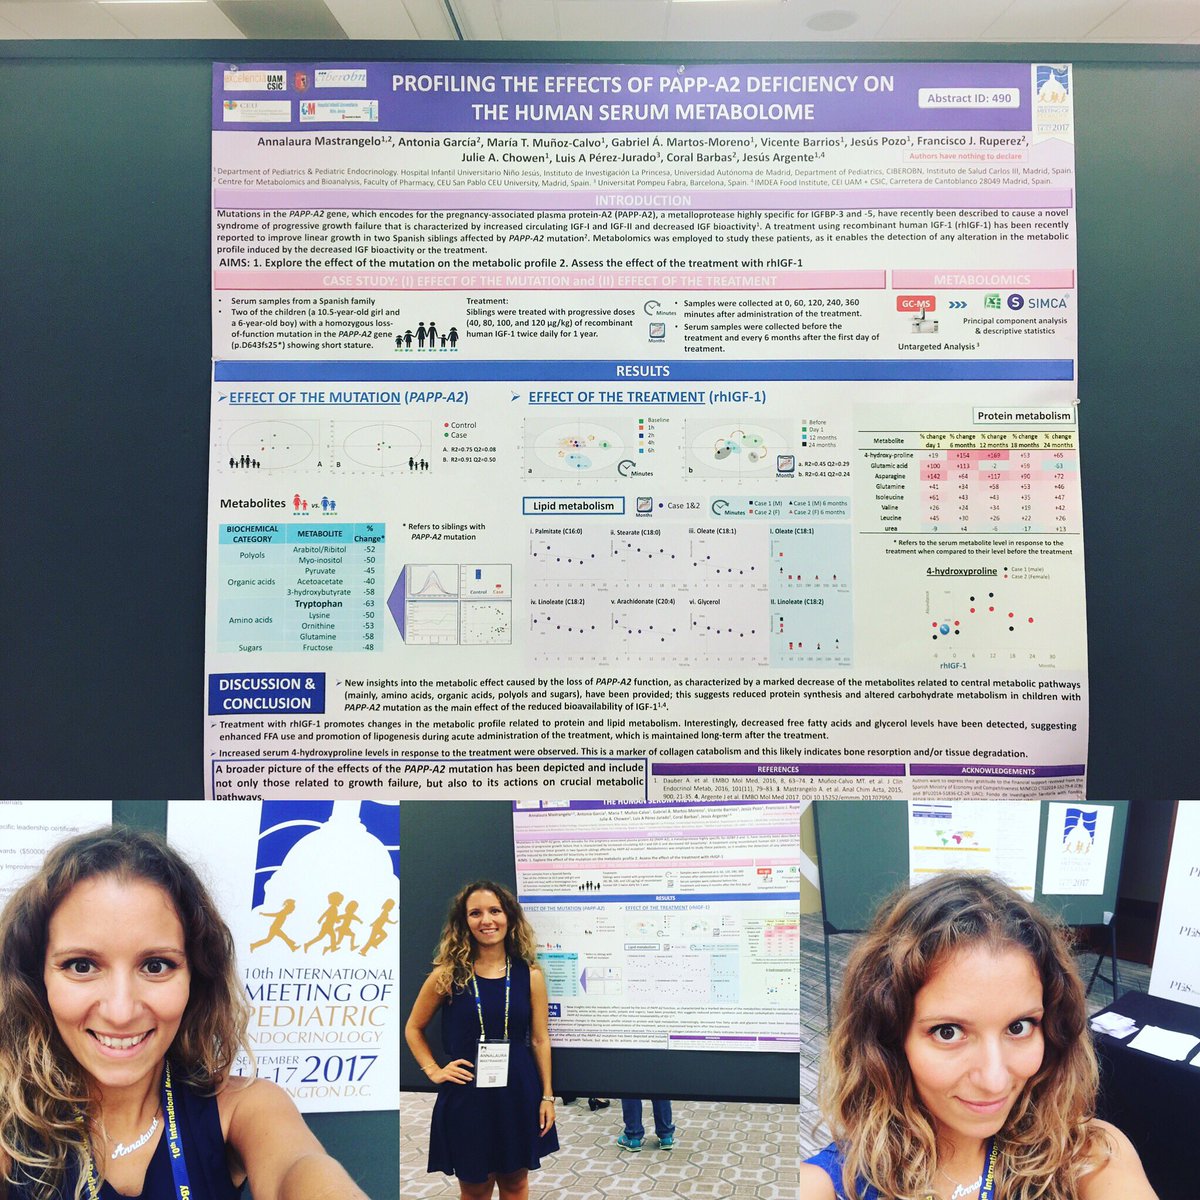 Profiling the effects of PAPP-A2 deficiency by #metabolomics. #Poster session at the #IMPE2017 #gcms #new #insights #GeneMutation